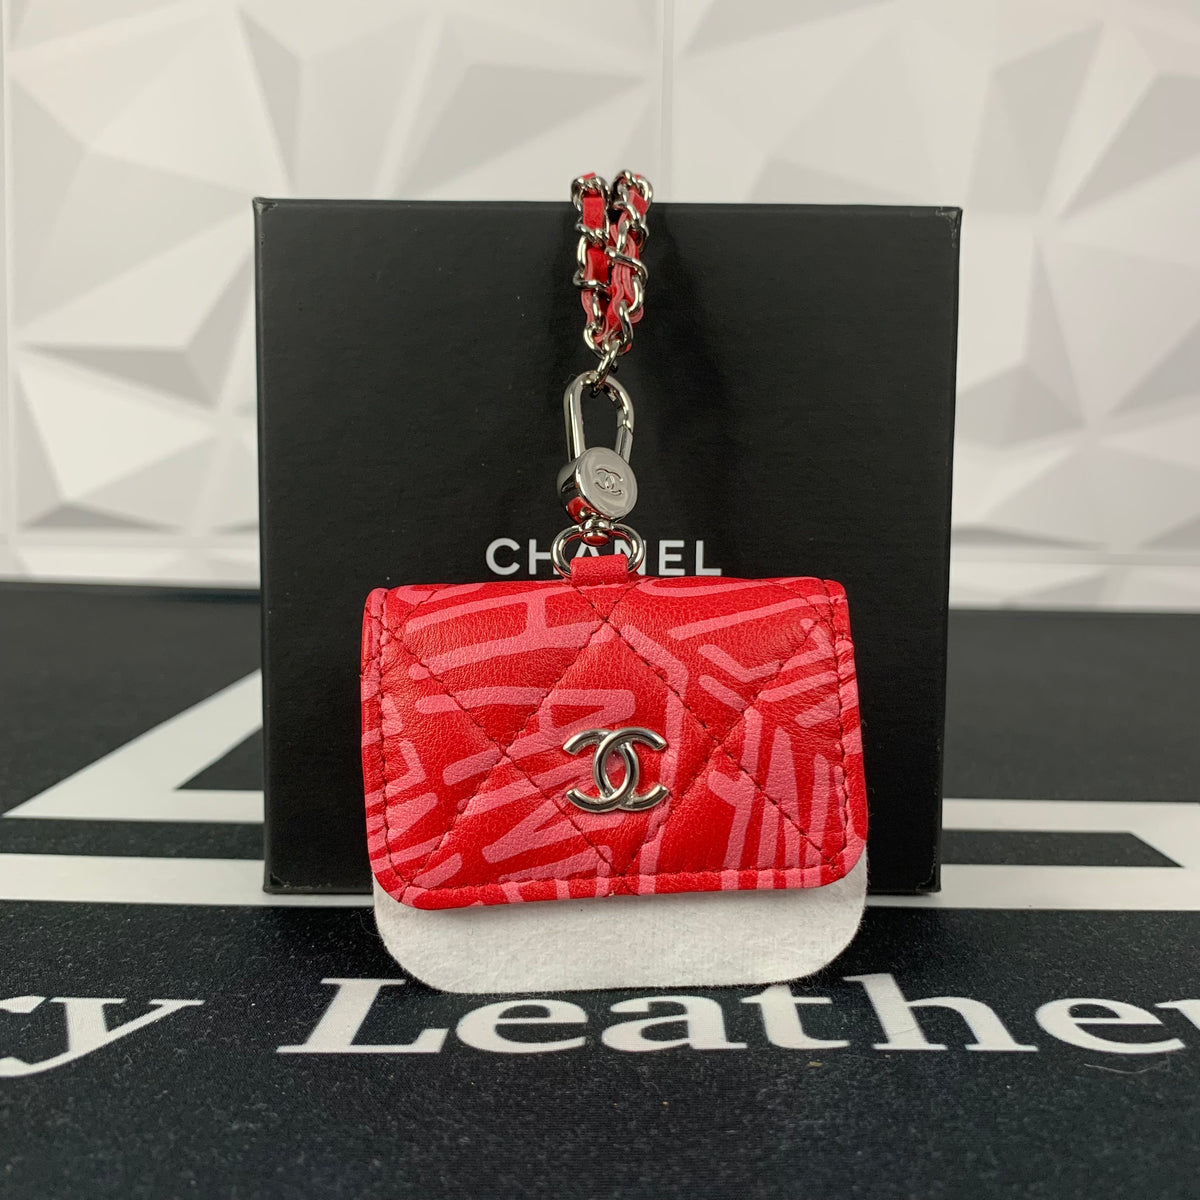 CHANEL, Accessories, Chanel Airpods Pro Case In Iridescent White Leather  With Silver Hardware